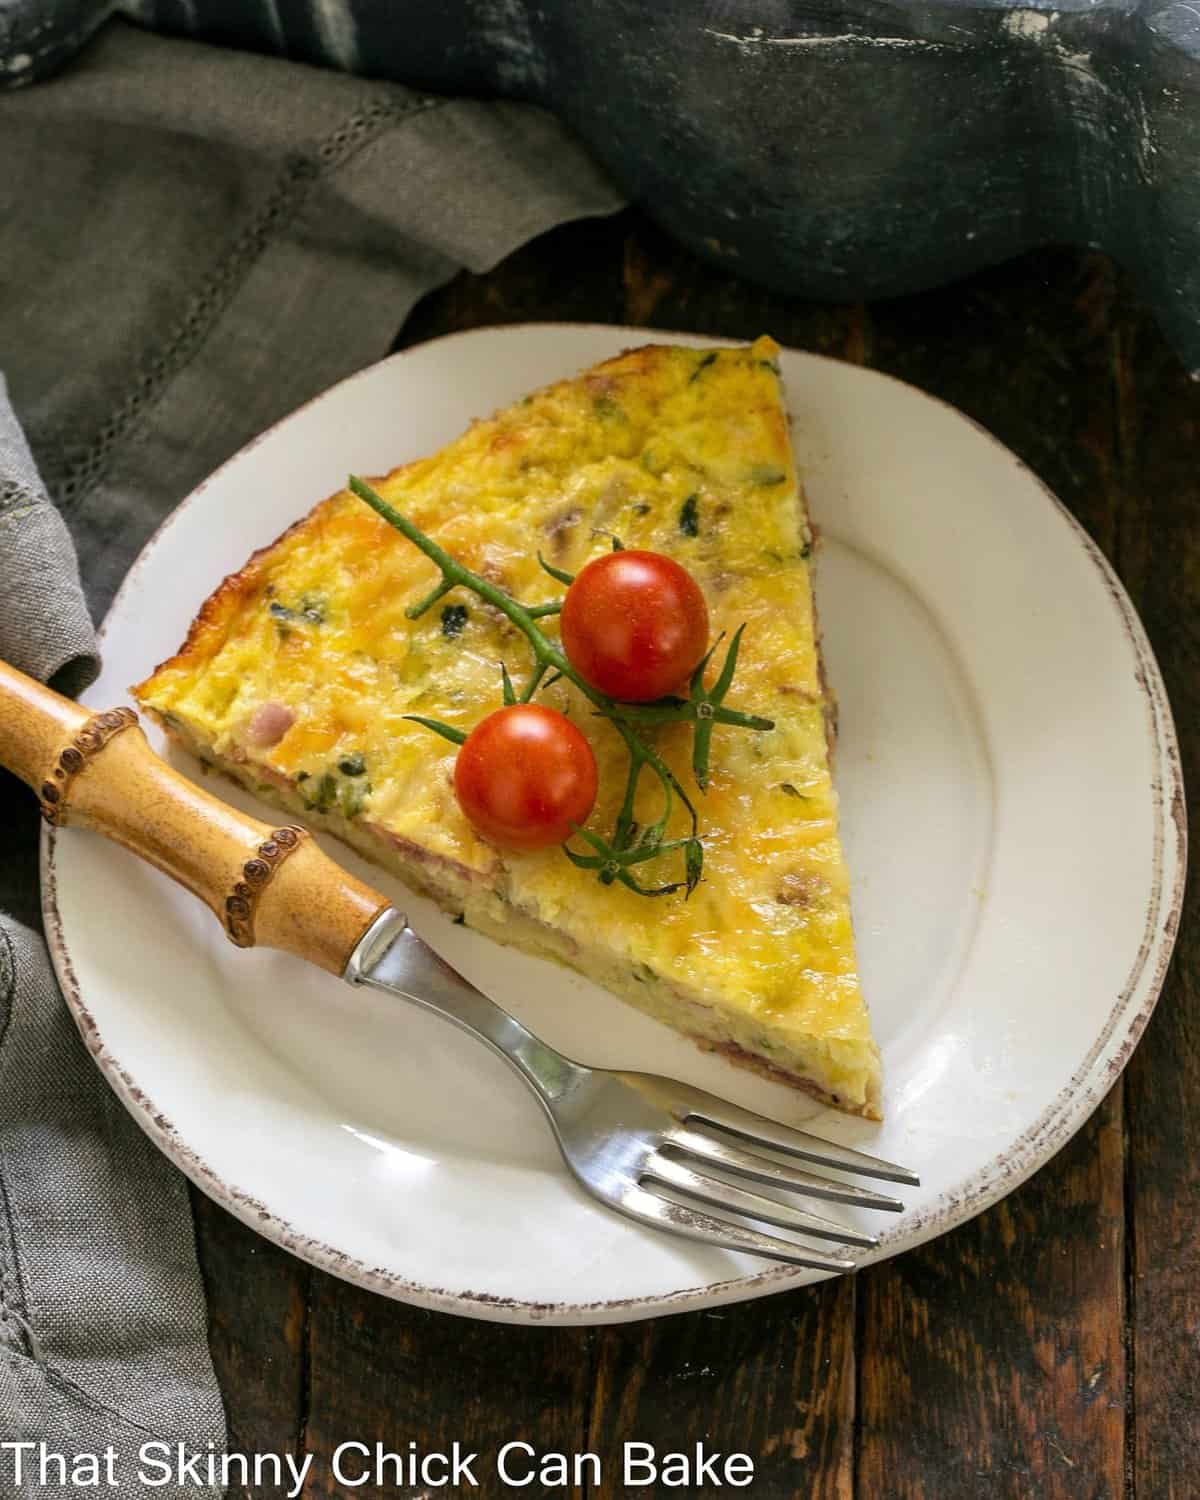 Zucchini Quiche with Prosciutto - With Pro-Tips - That Skinny Chick Can Bake